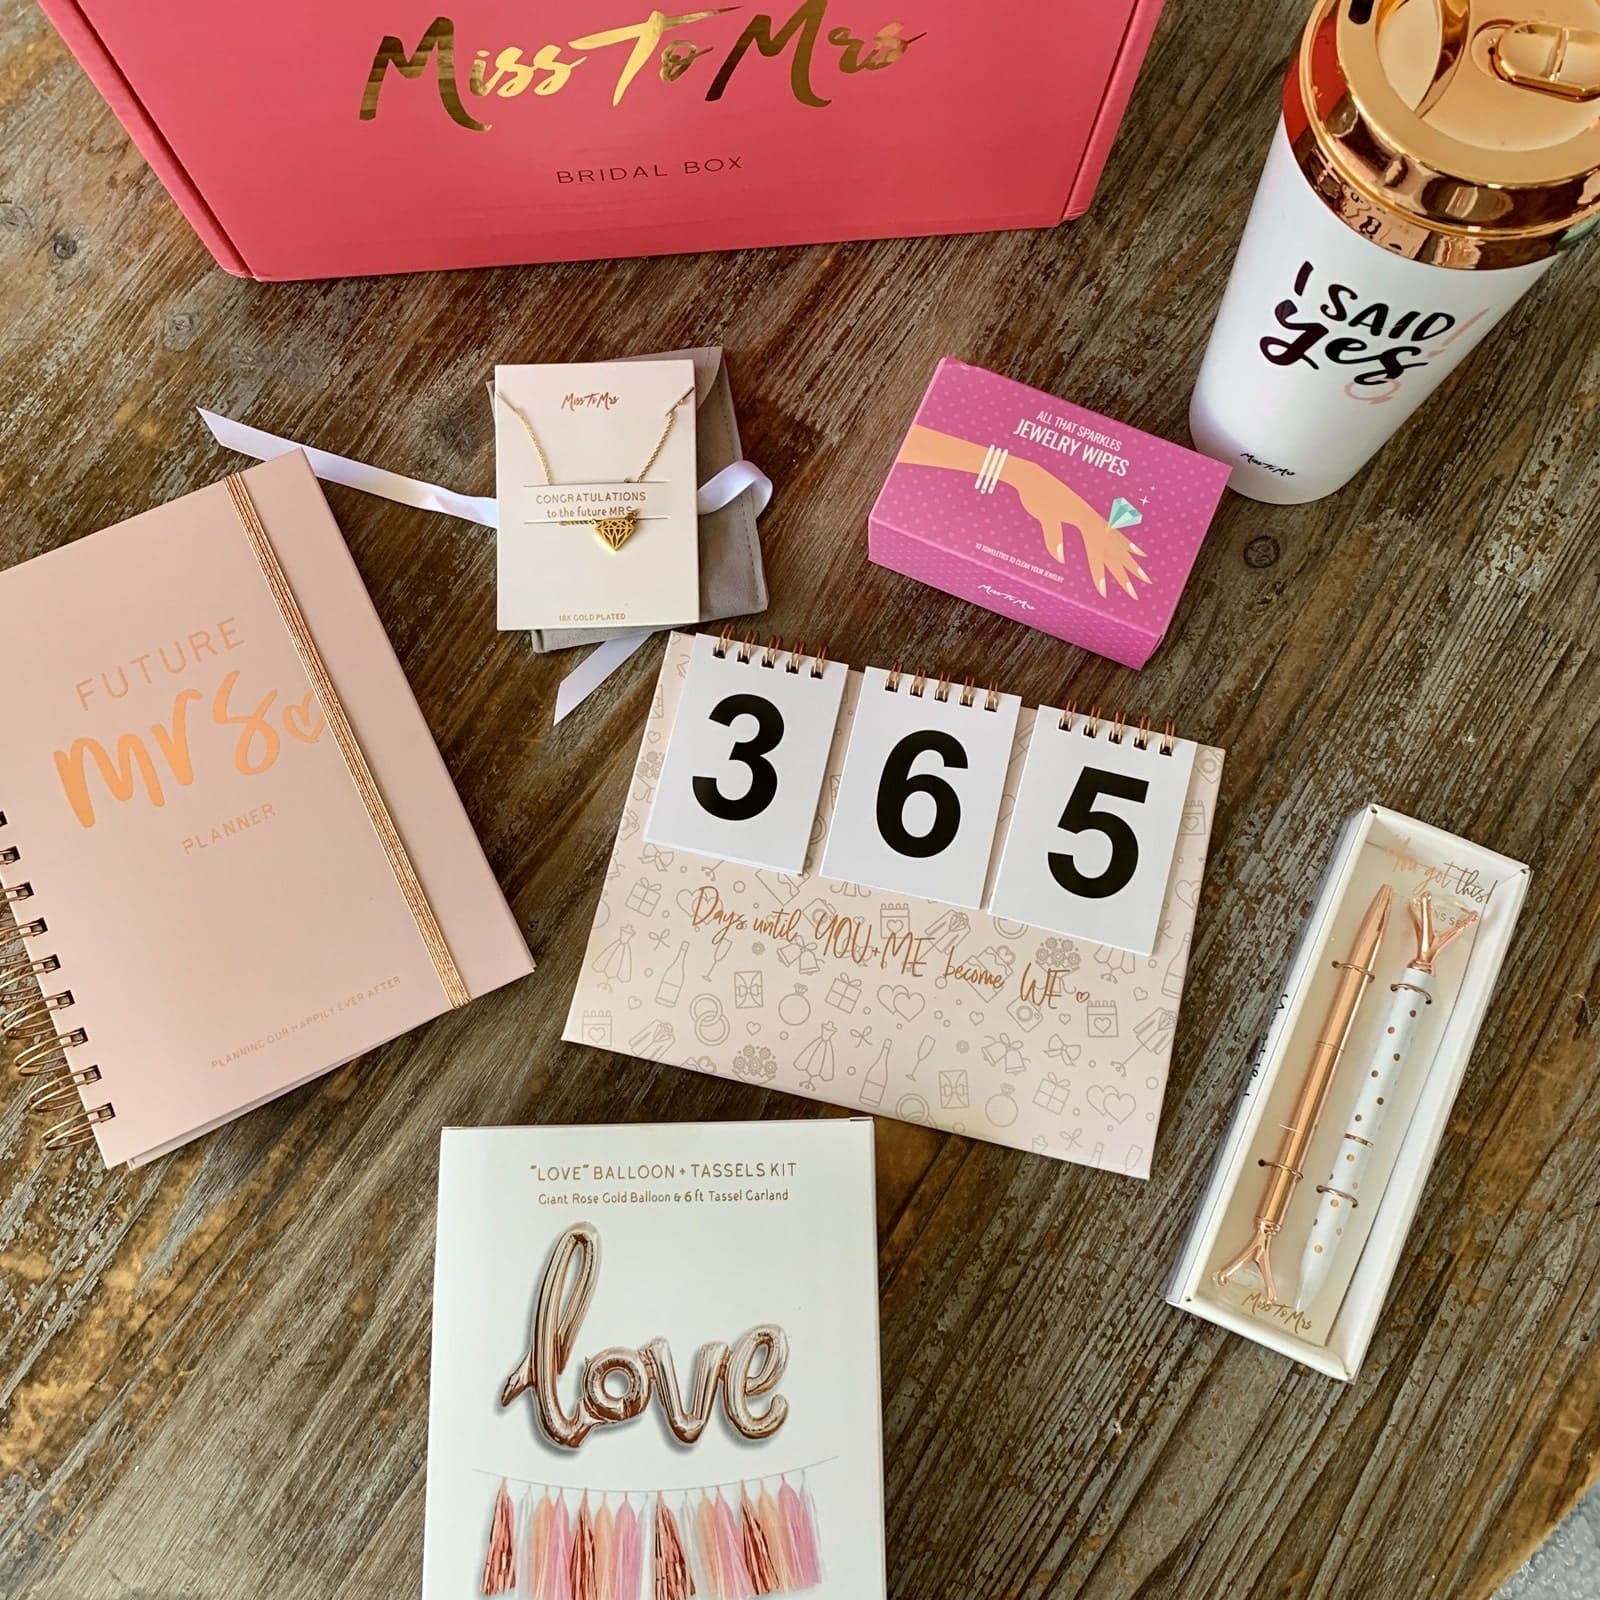 miss to mrs bridal box review first box